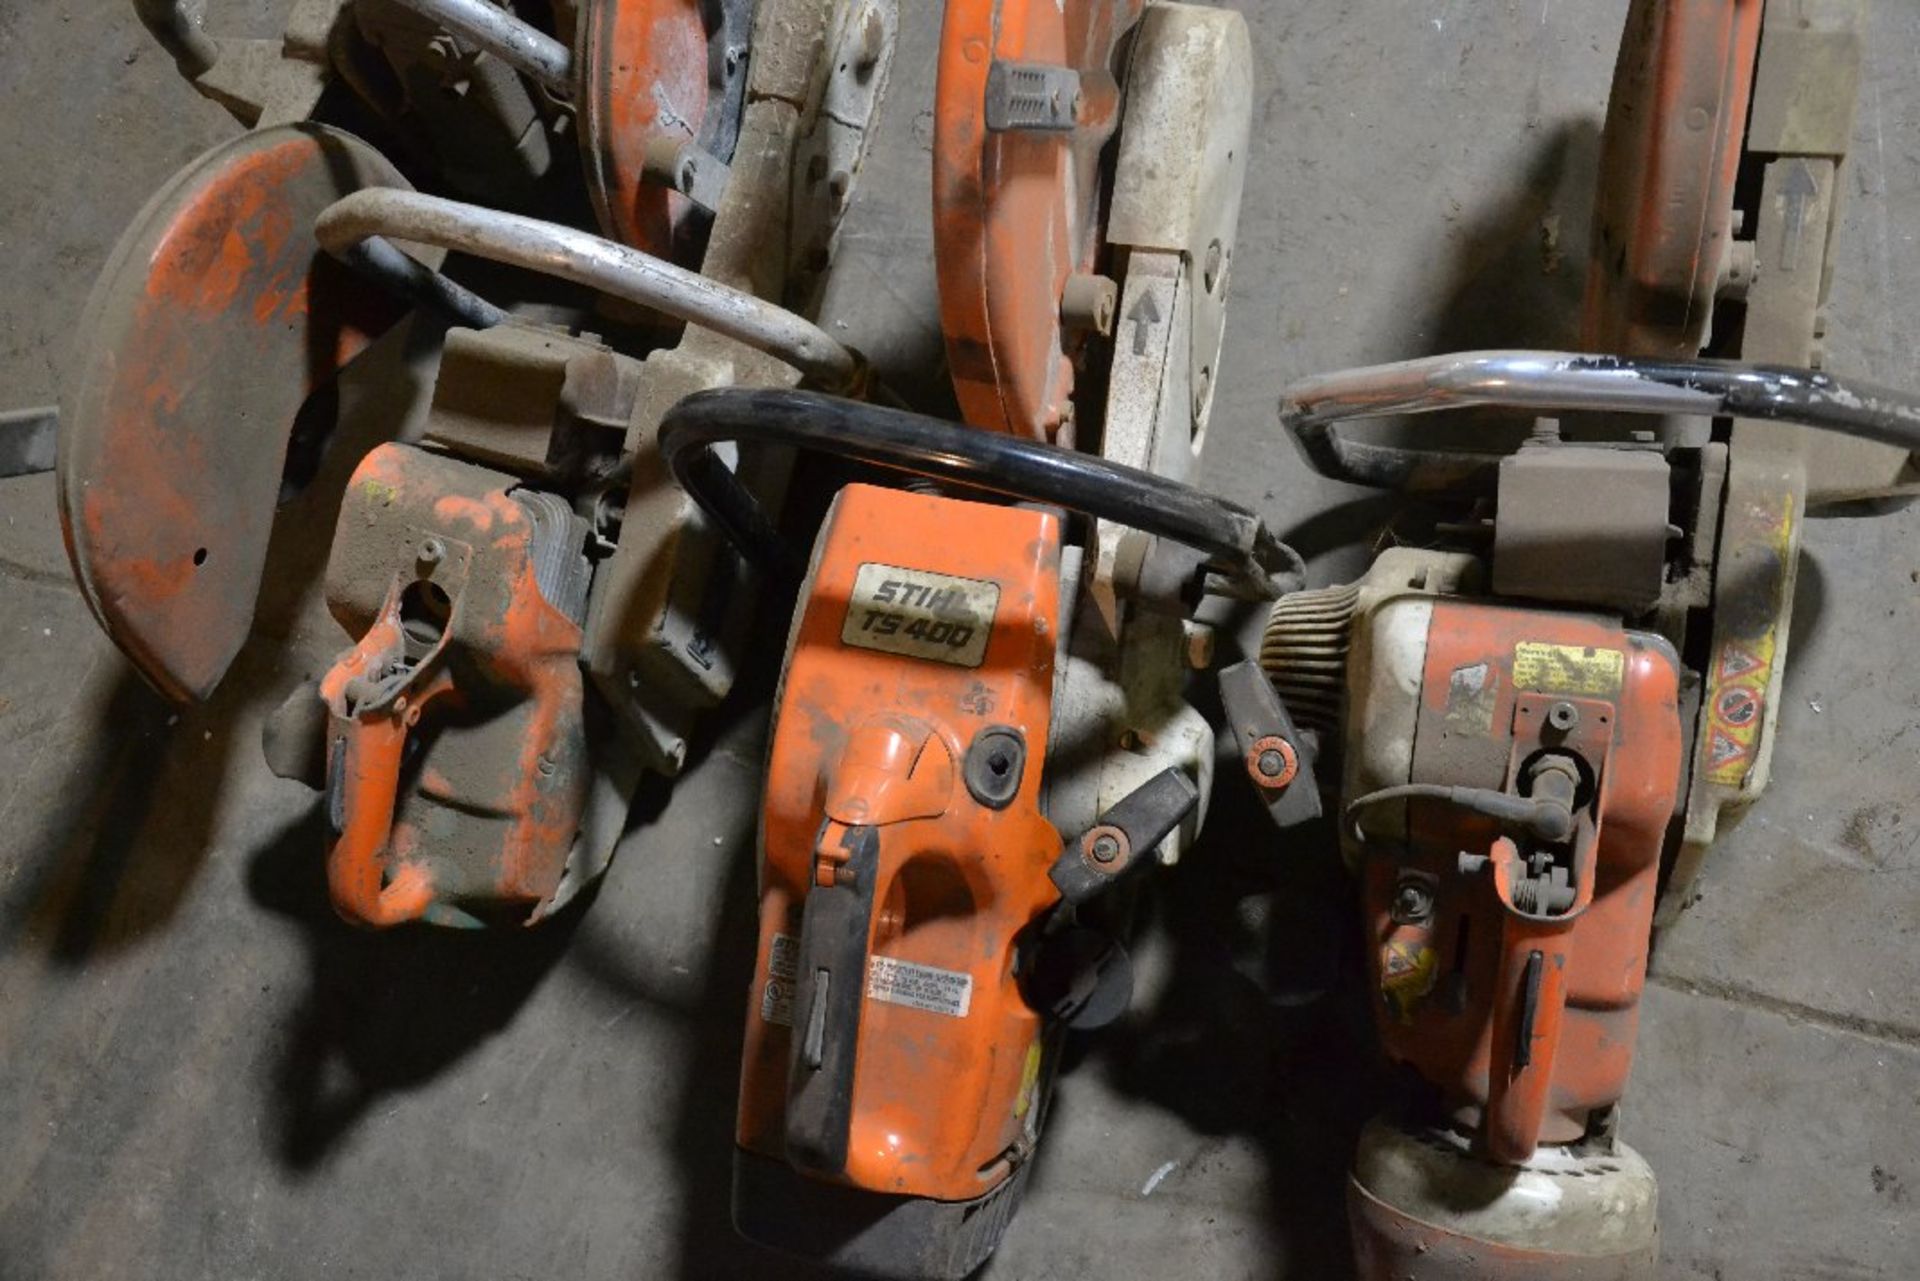 4 Stihl concrete saws ( 1 TS 350, 1 TS 400, and 2 additional Stihl saws for Parts Only) - Image 2 of 2